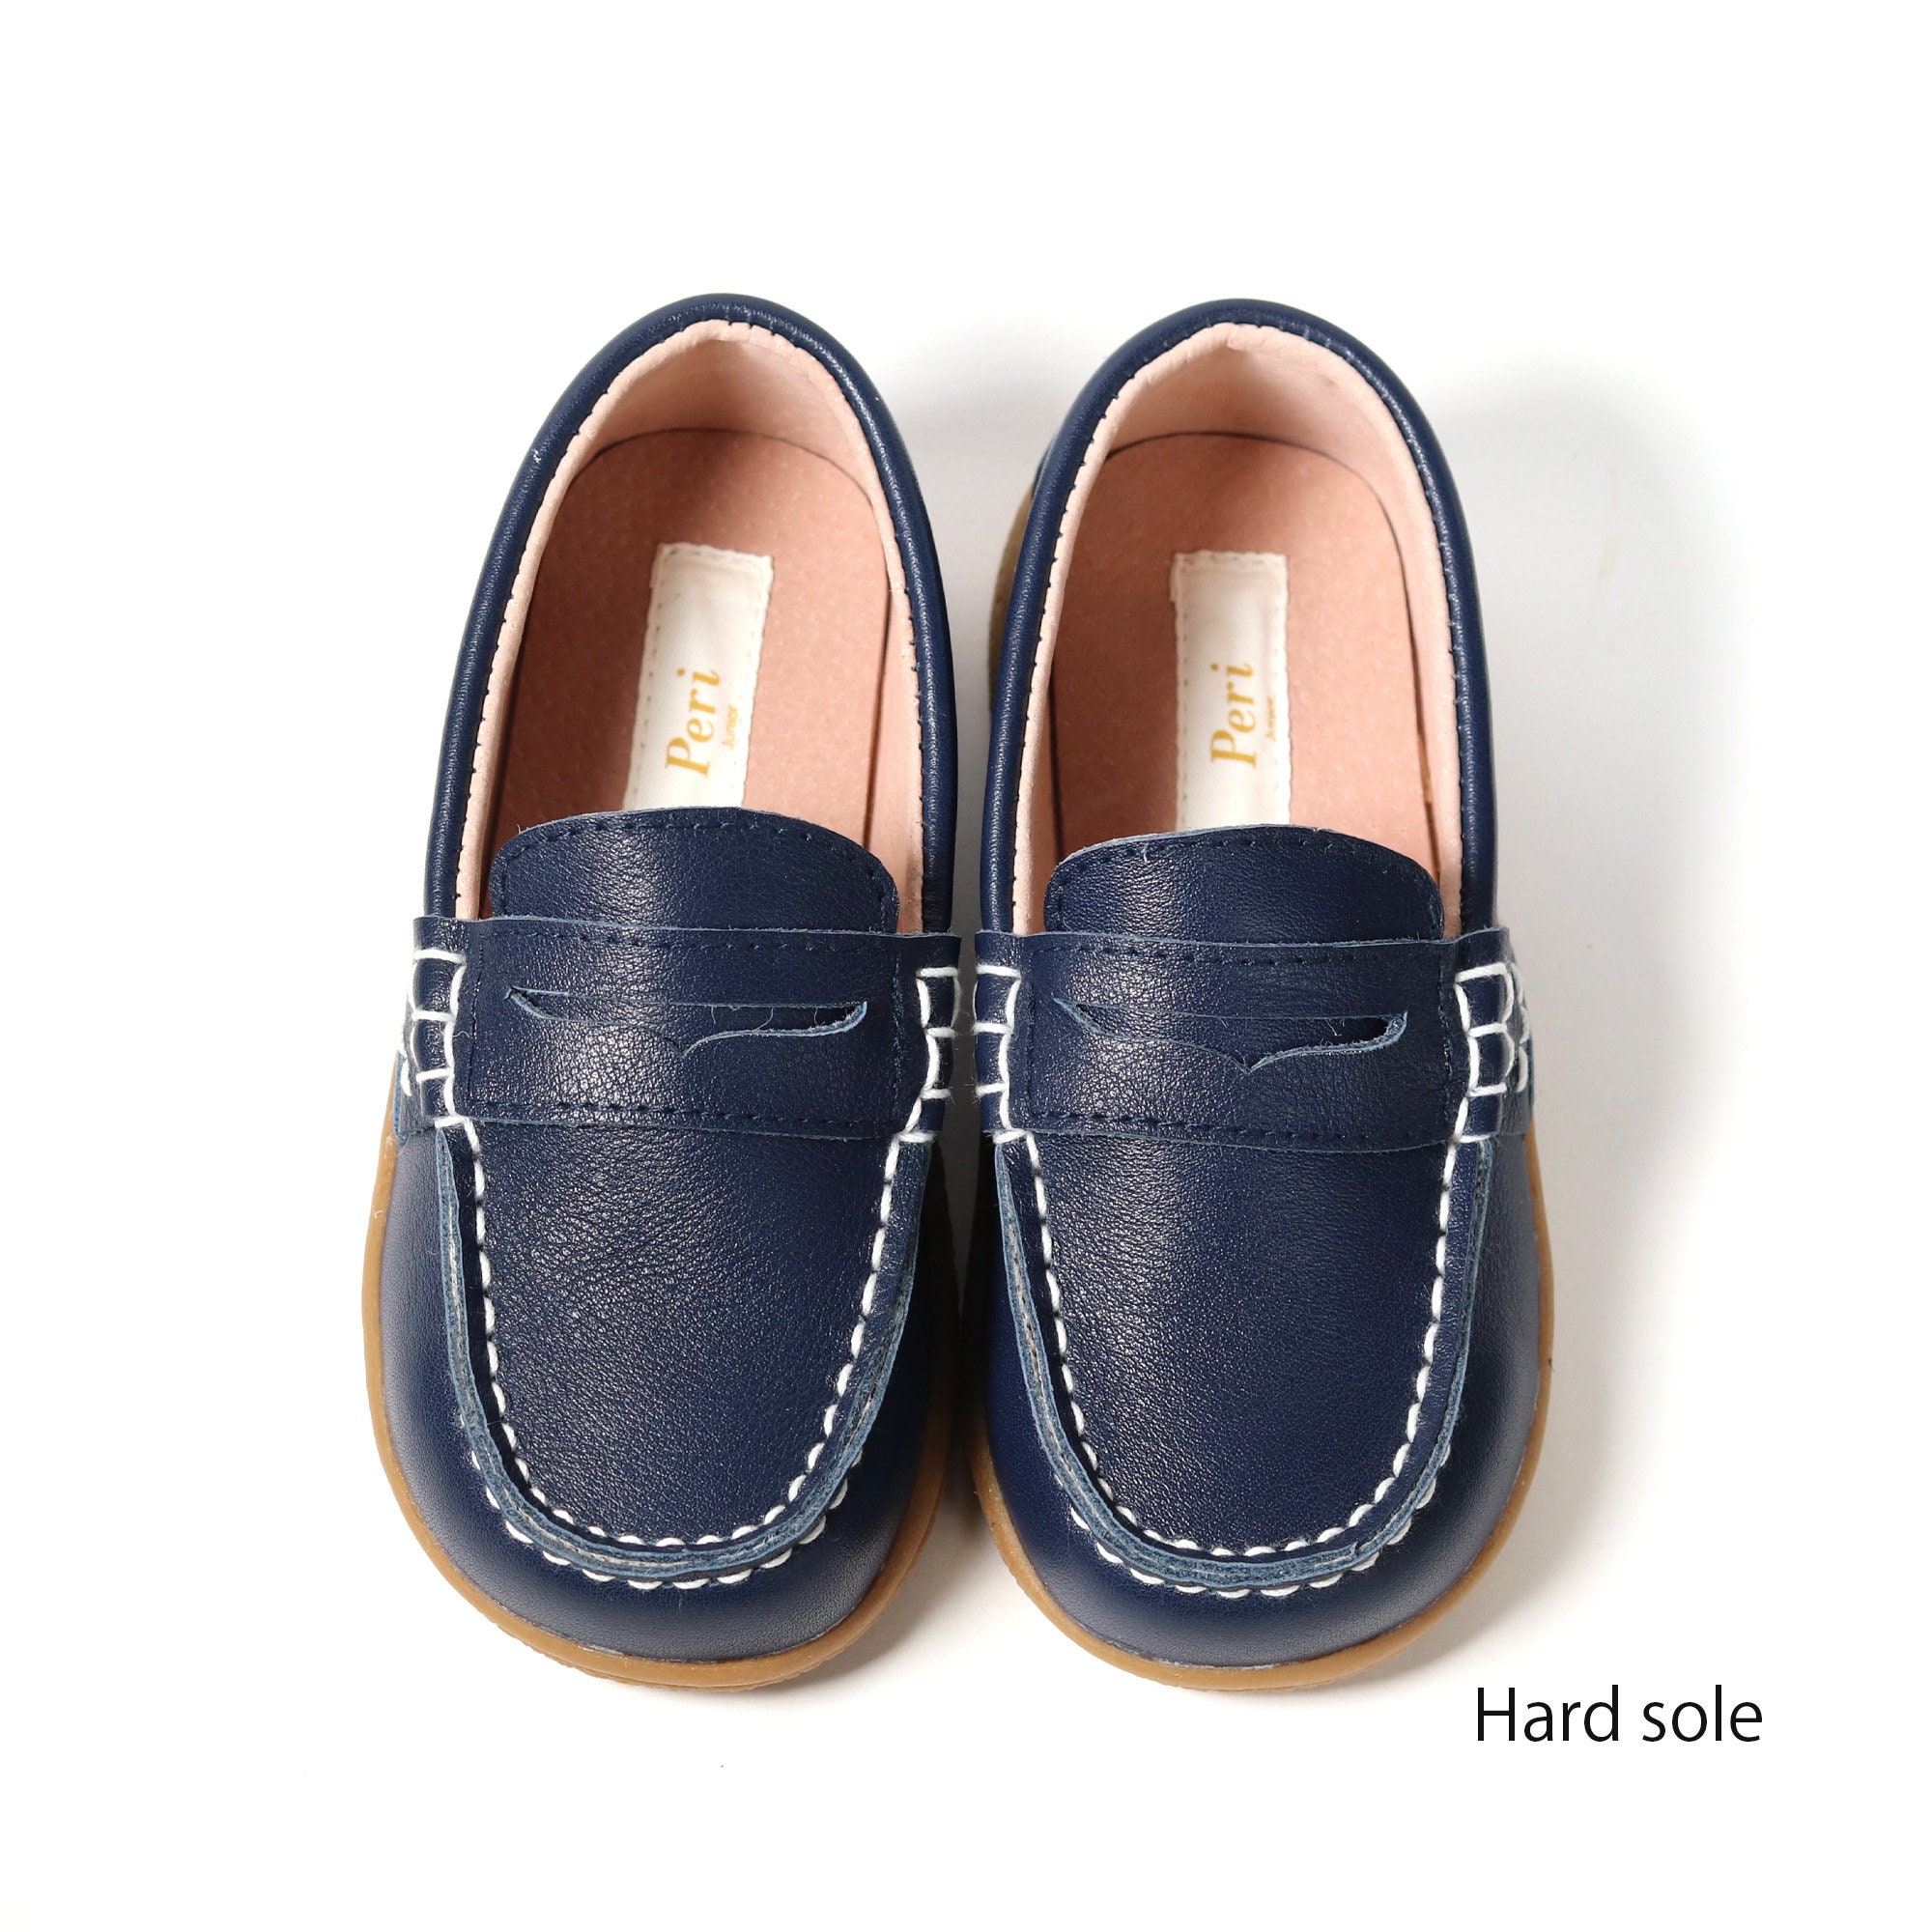 pediped Boys Pediped Navy Blue Suede Boat Shoes Orig $45  0-6 months 